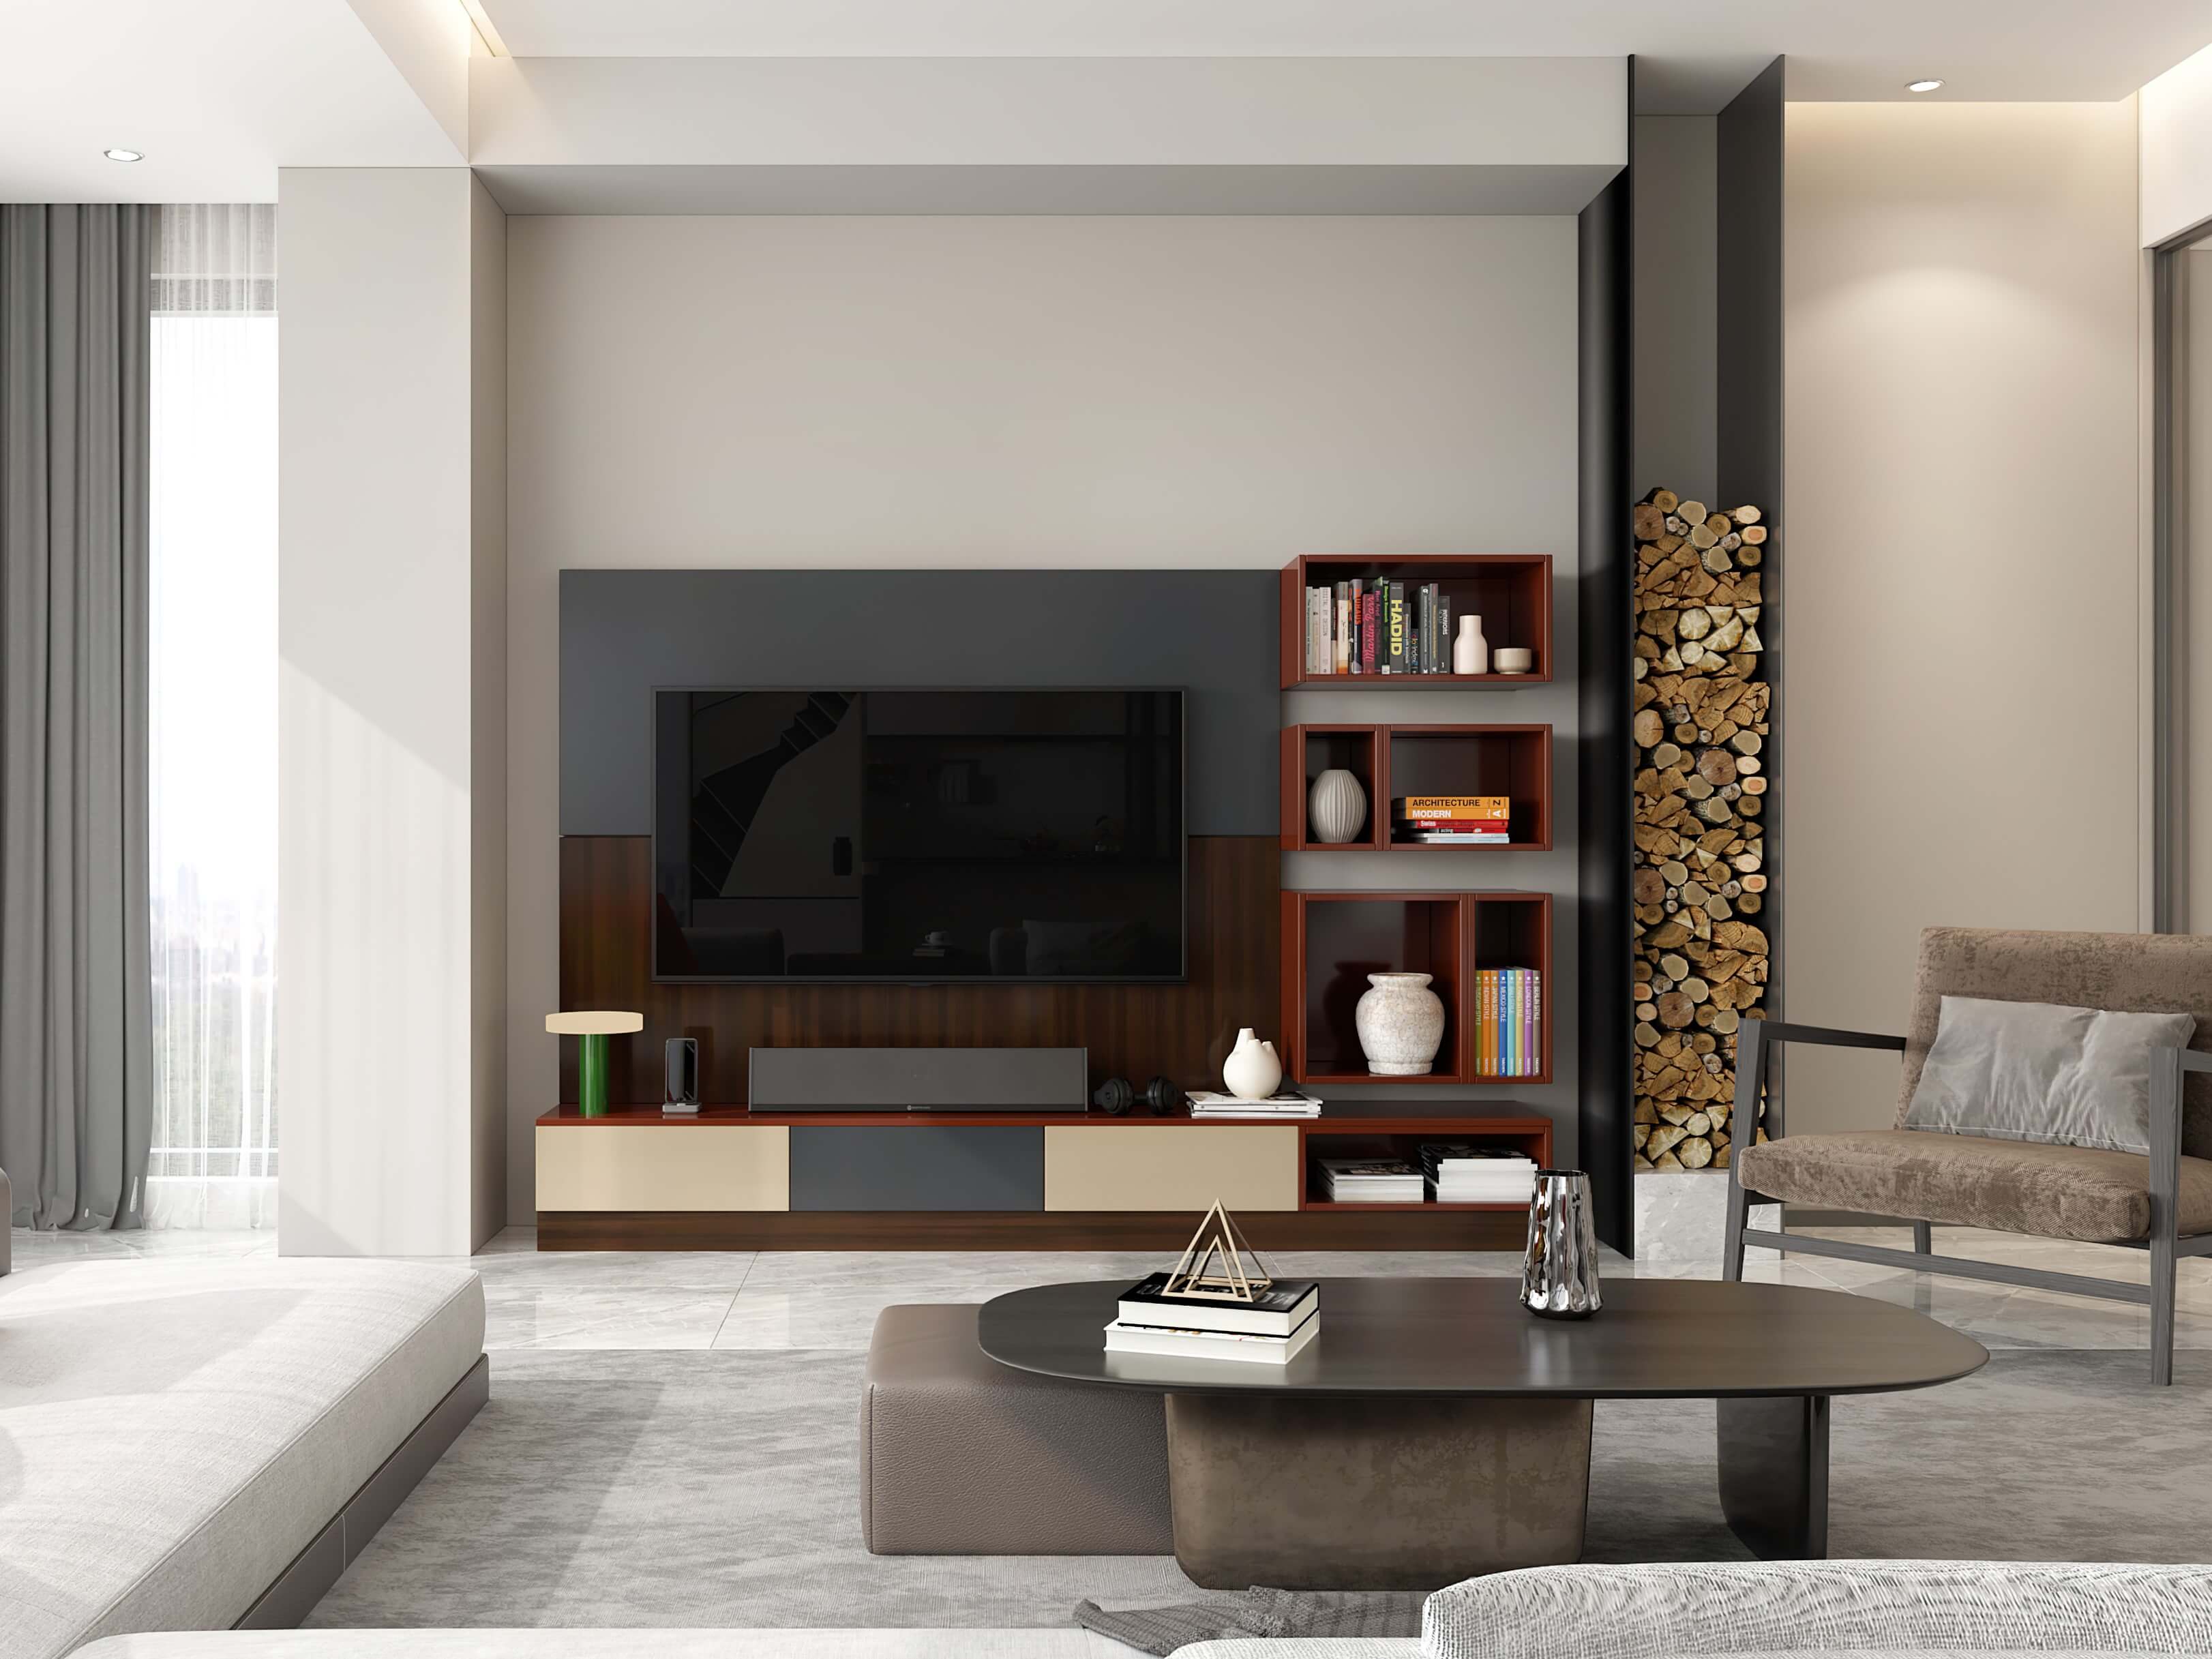 Spacious living room design with neutral colour palettes & open units - Beautiful Homes